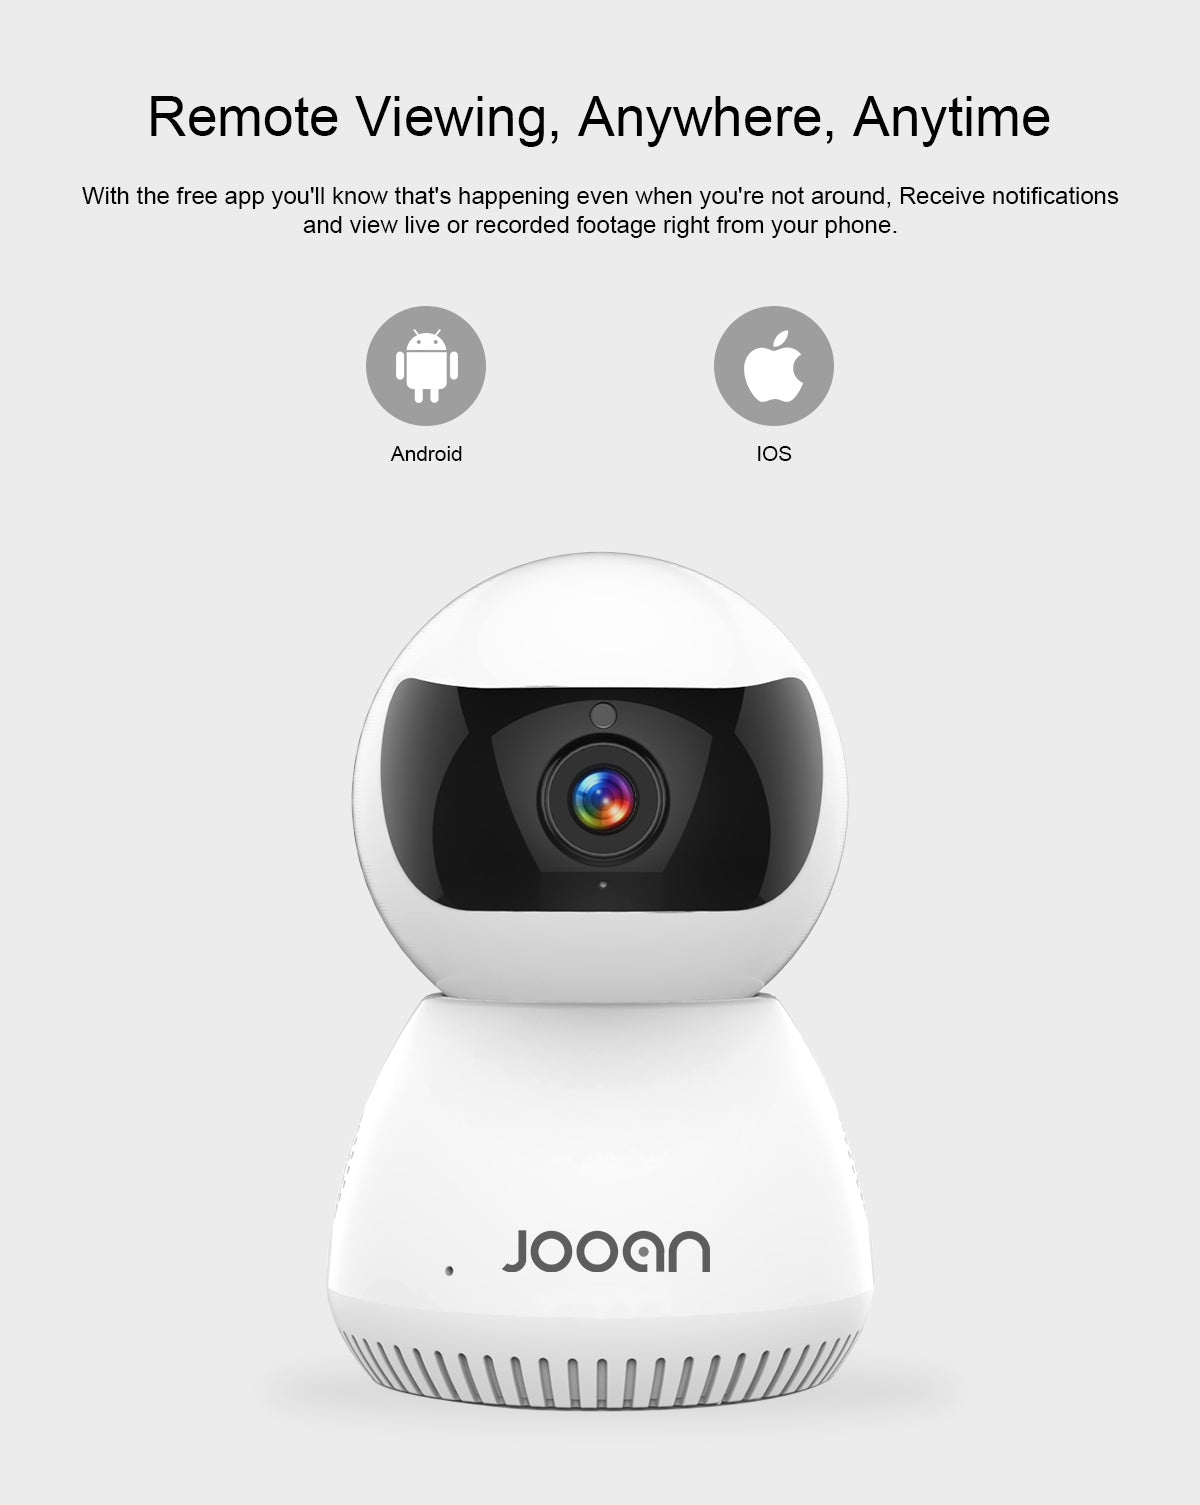 HD 1080P Wireless IP Smart  Camera, Automatic Tracking, Home Security Surveillance